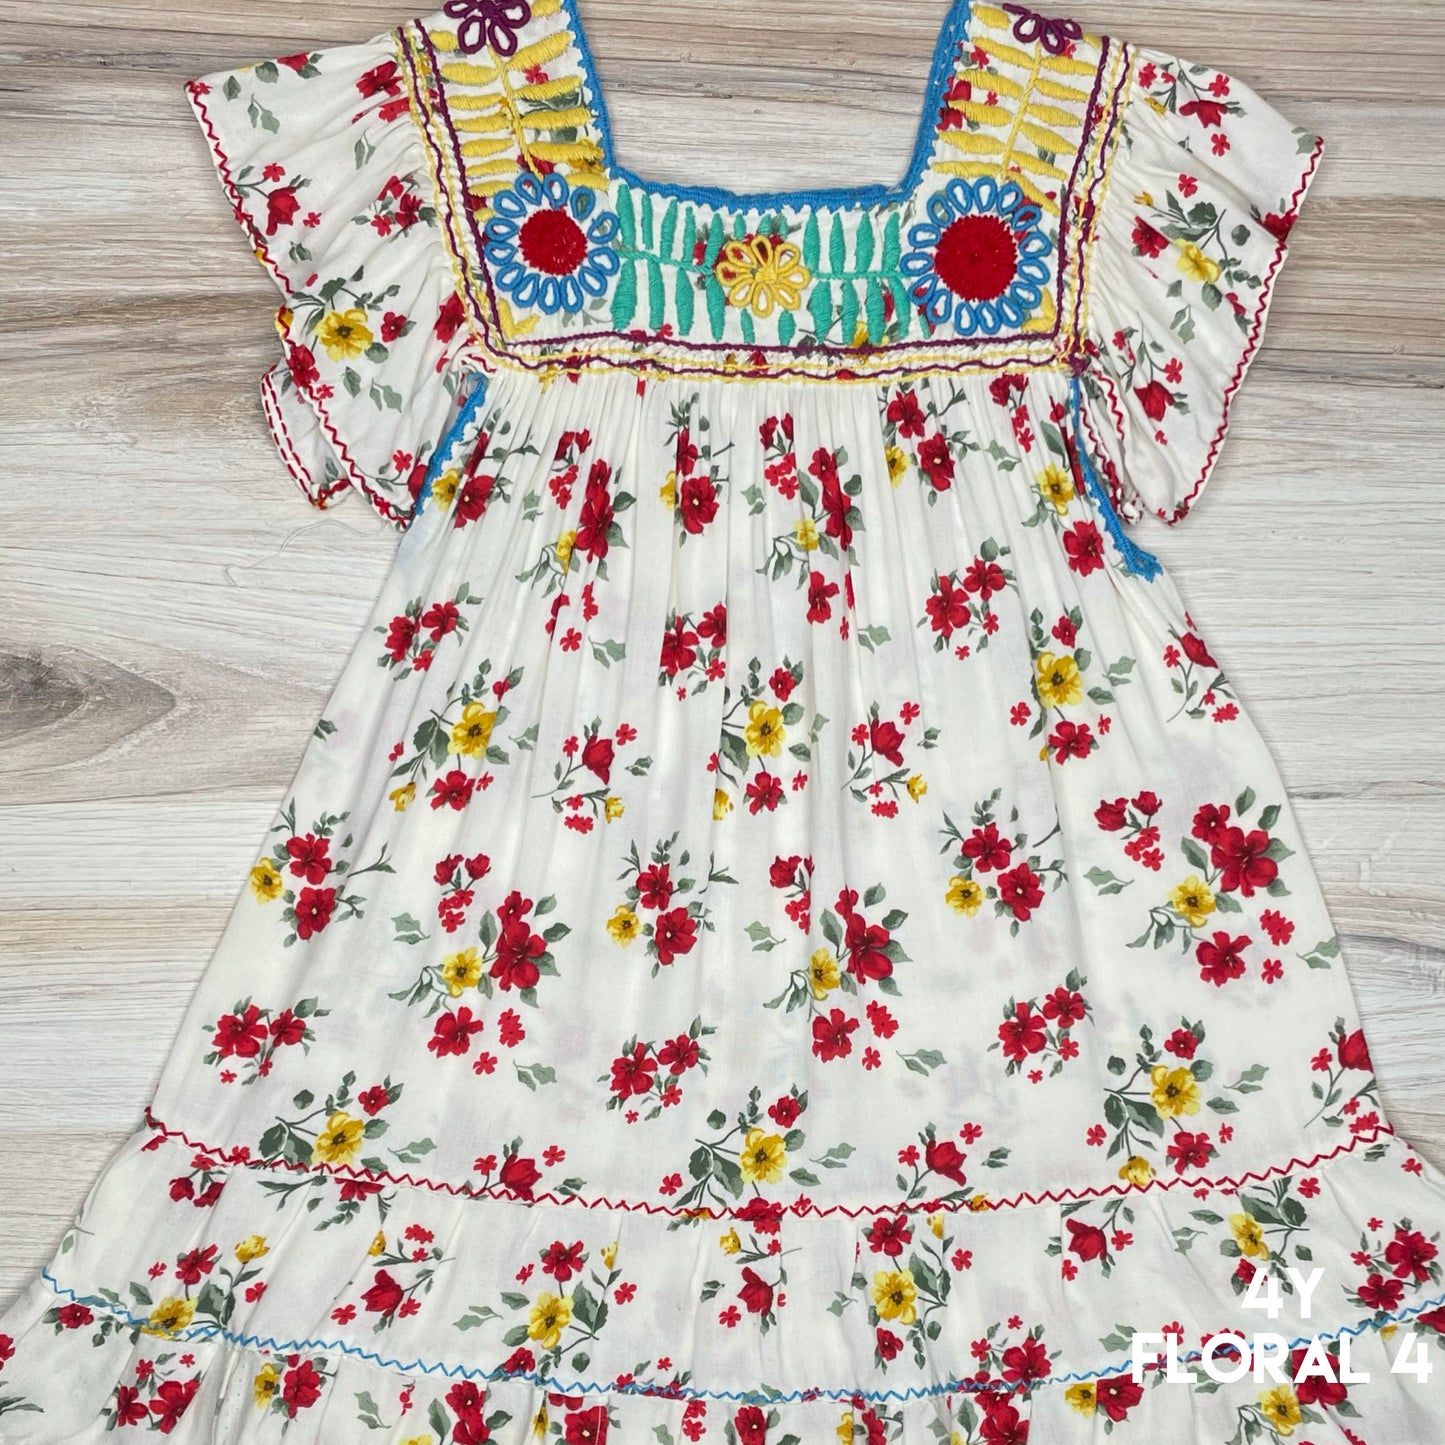 Mexican Girl Dress Rococo Floral Print - Butterfly Sleeve